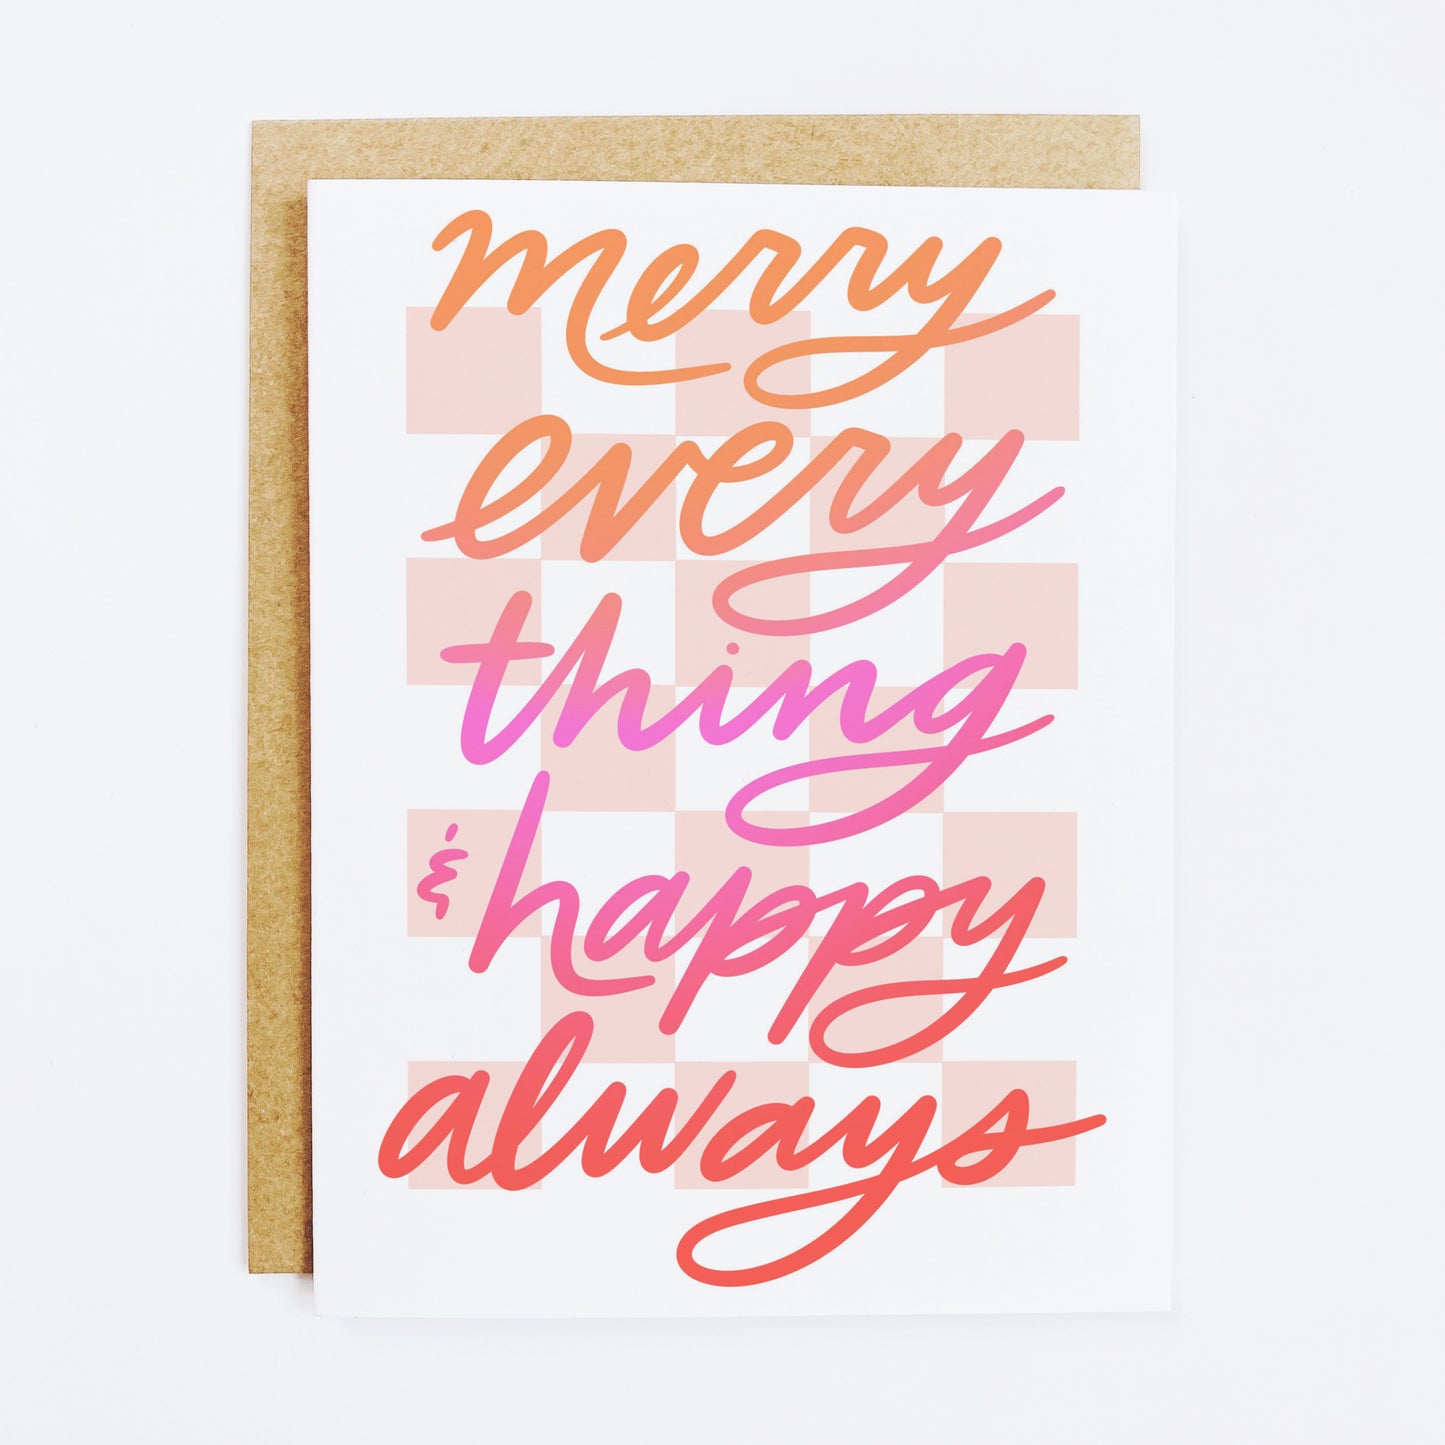 Merry Everything and Happy Always Card